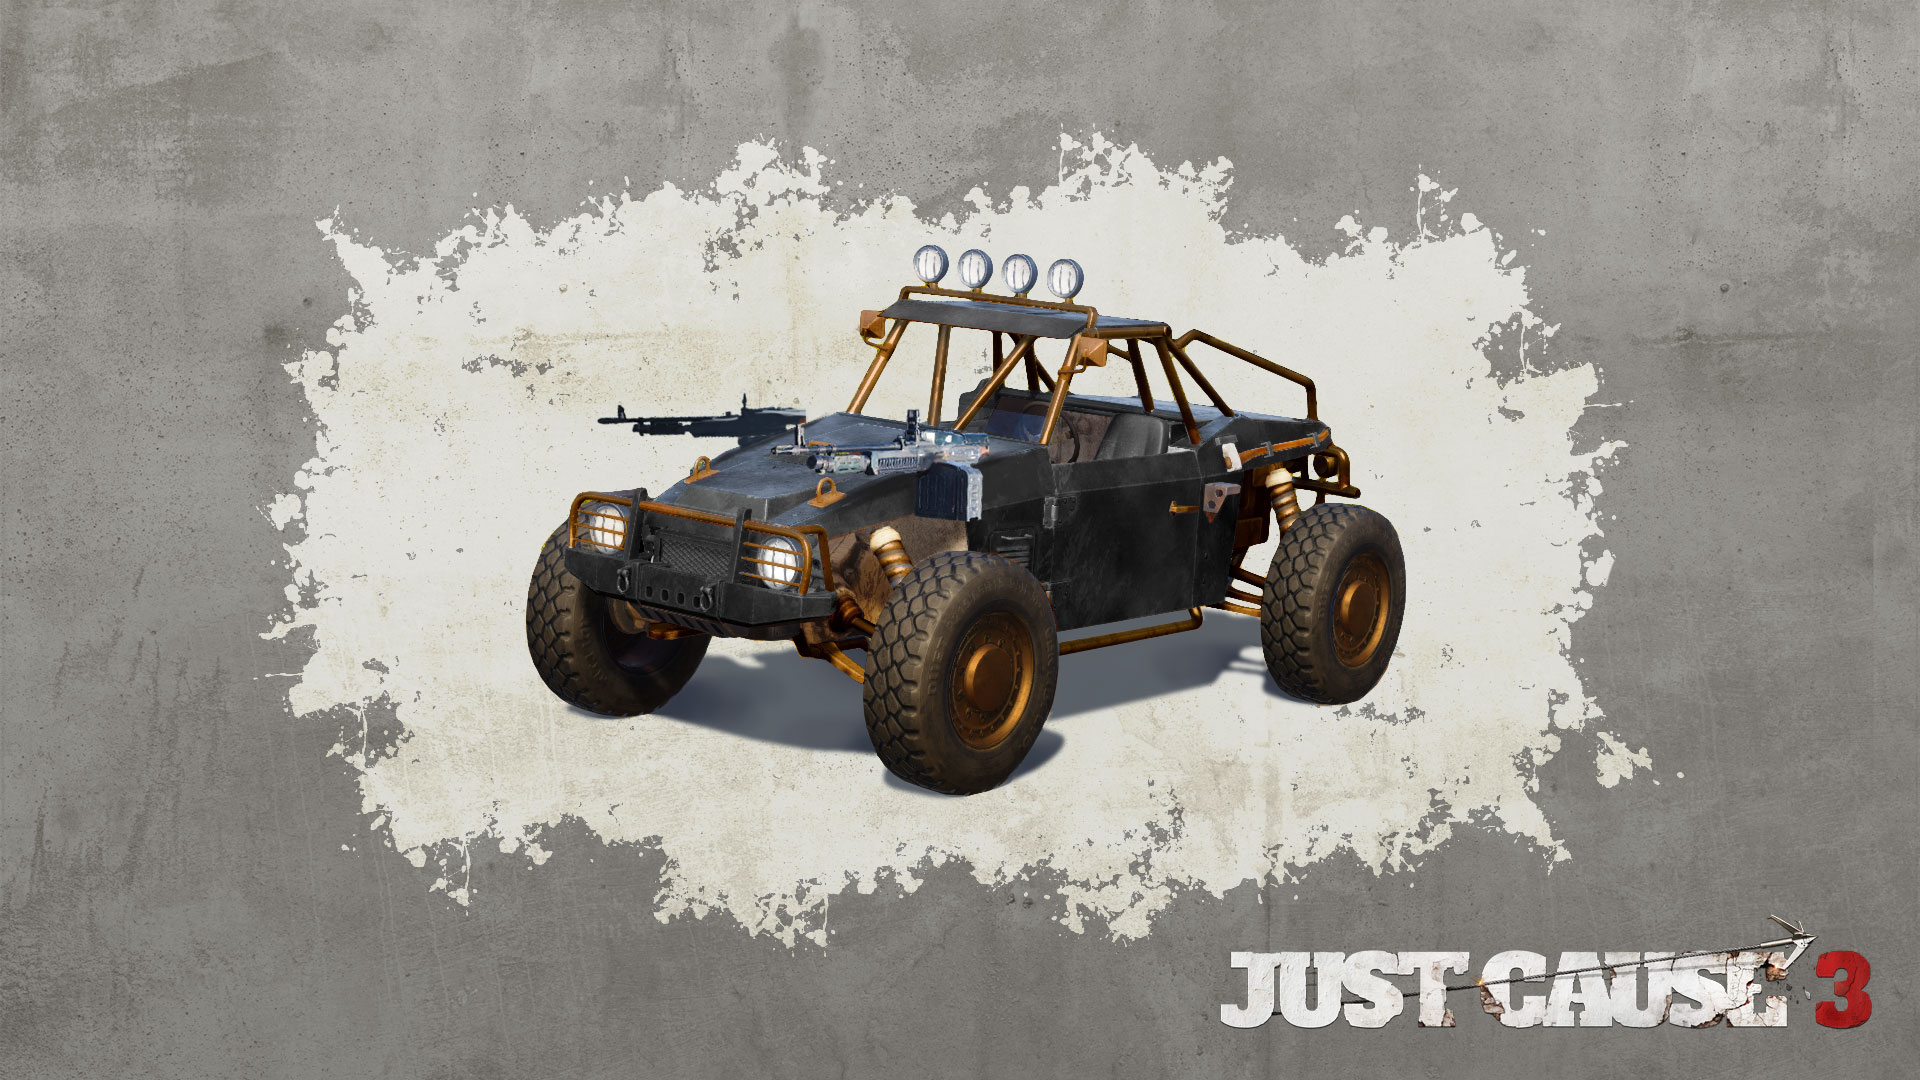 [$ 1.56] Just Cause 3 - Combat Buggy DLC Steam CD Key